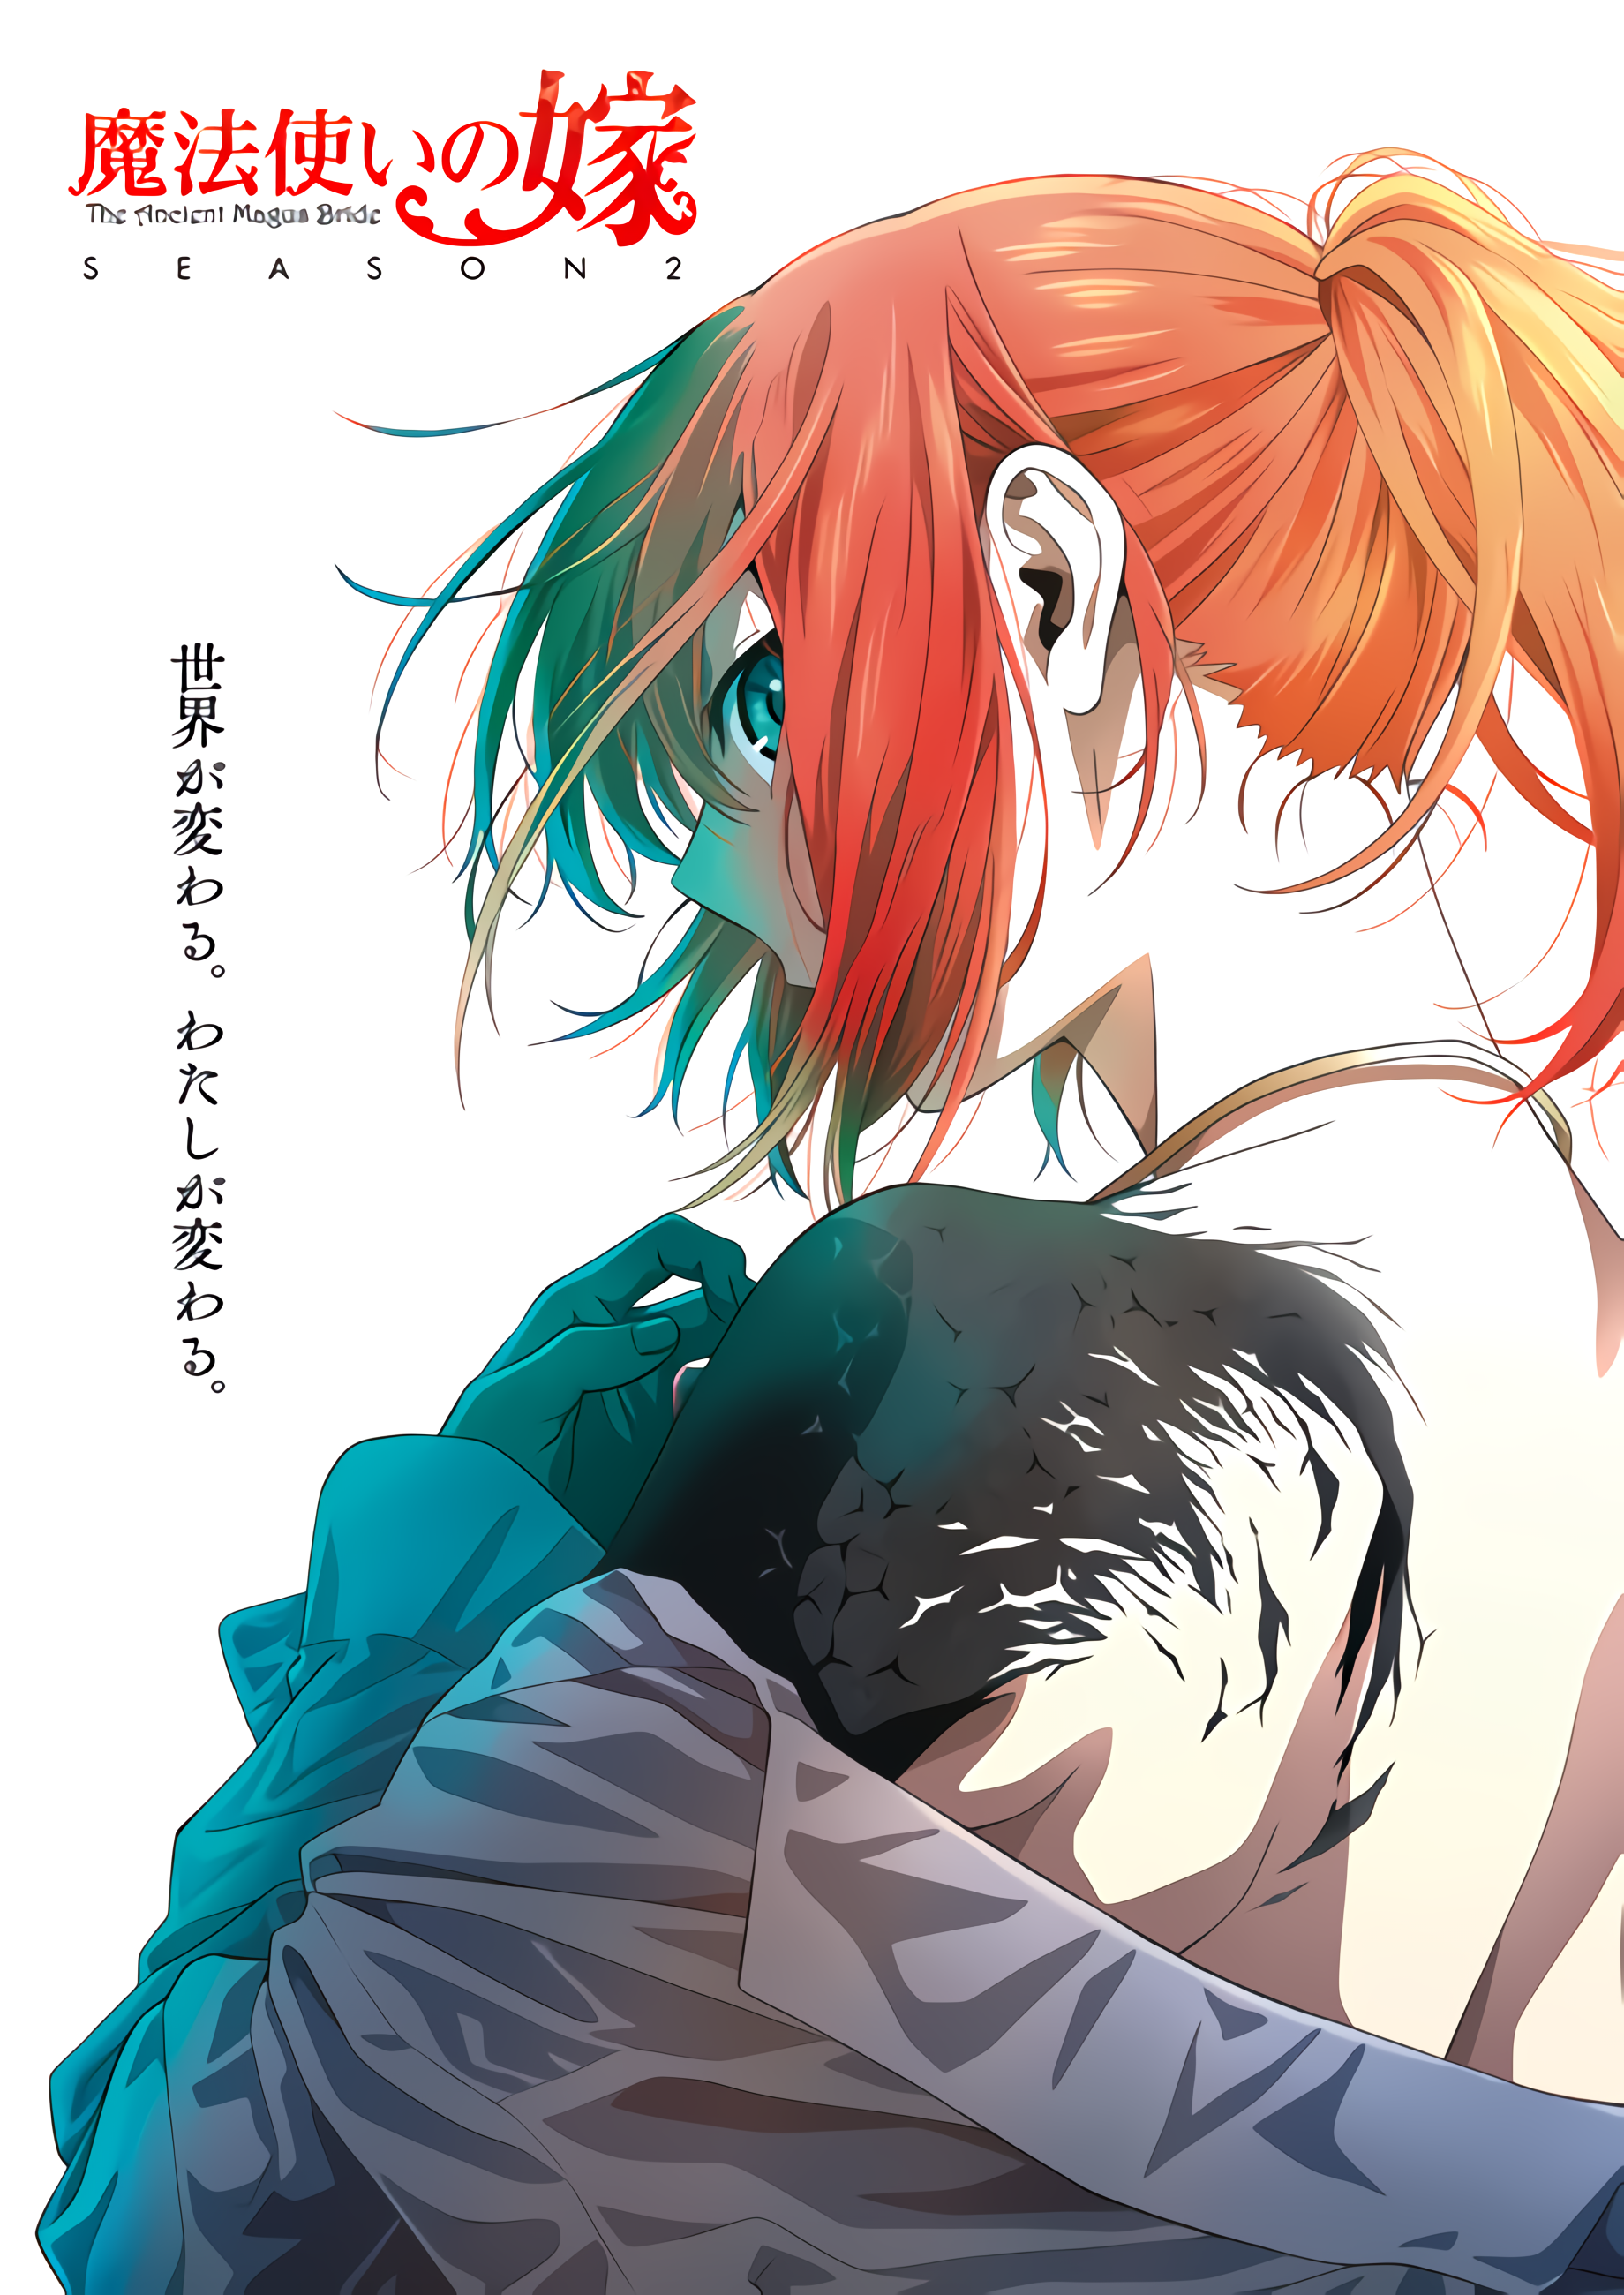 Ancient Magus' Bride Anime Series Finally Gets A 2nd Season, coming April 2023